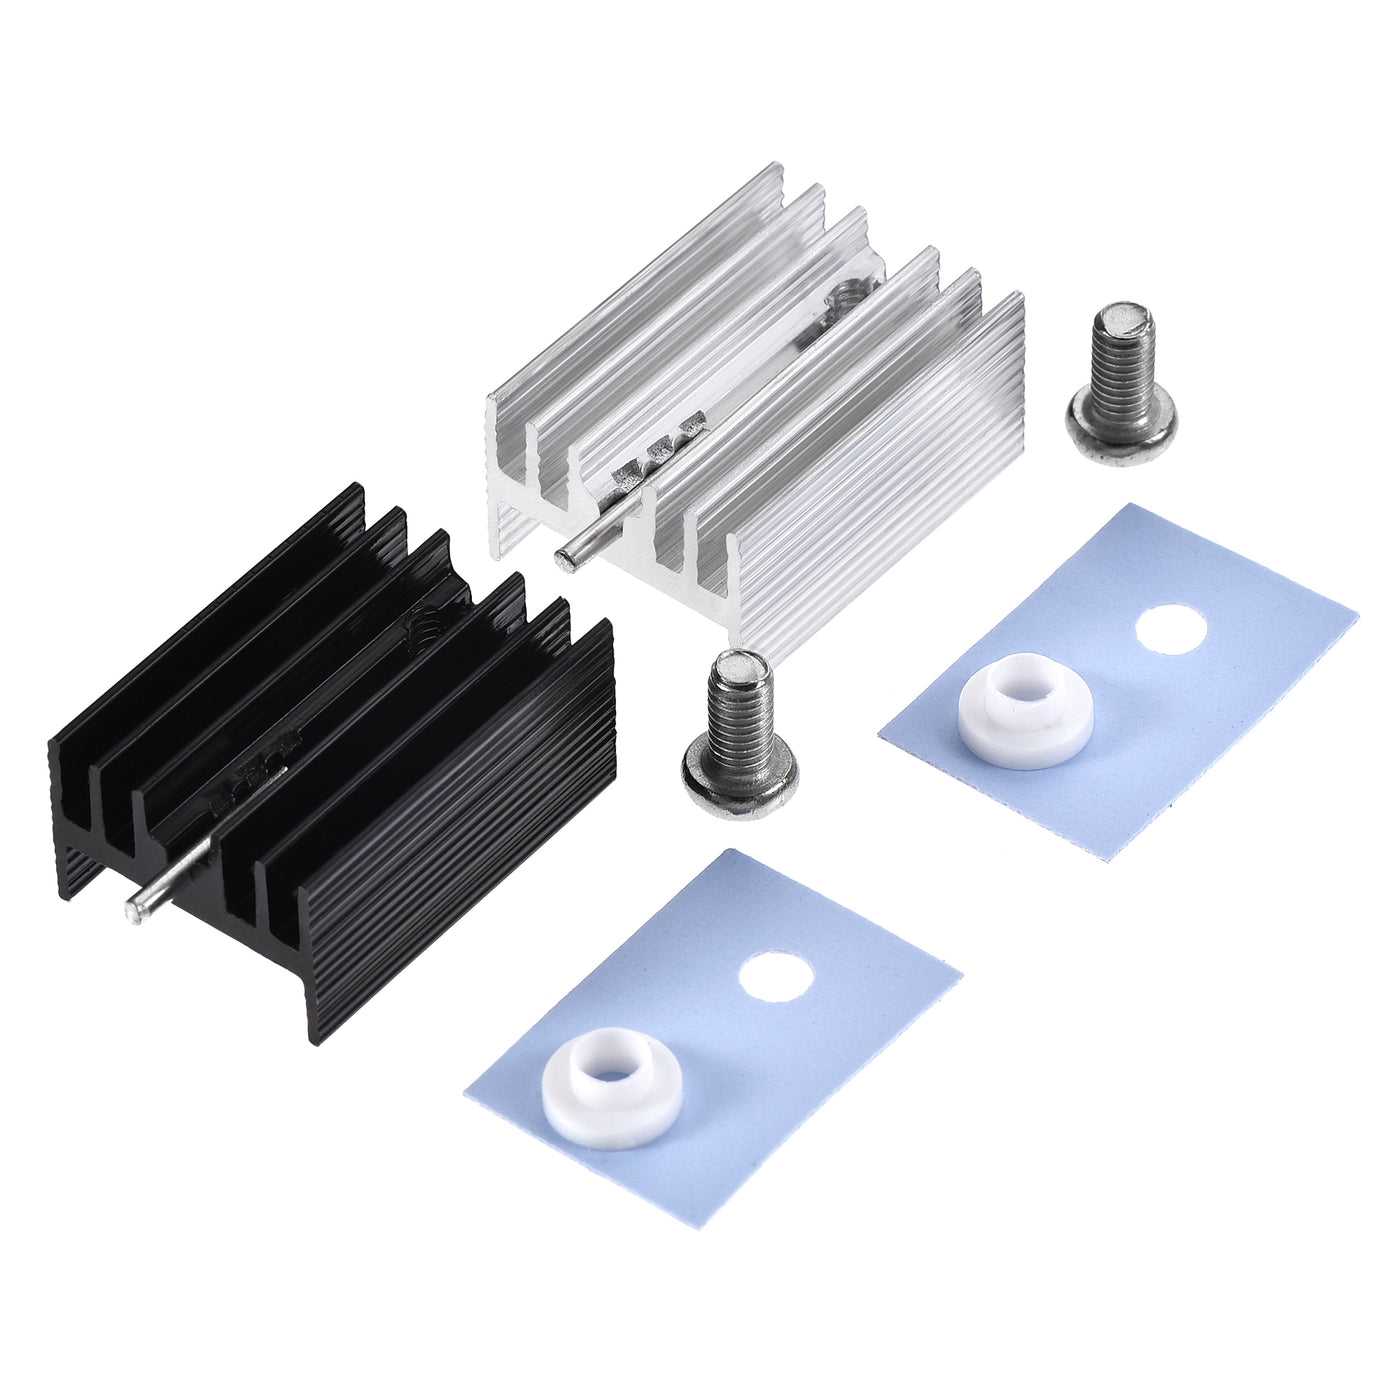 uxcell Uxcell 21x15x11mm TO-220 Aluminum Heatsink Kit for Cooling Transistor Diodes with a Support Pin